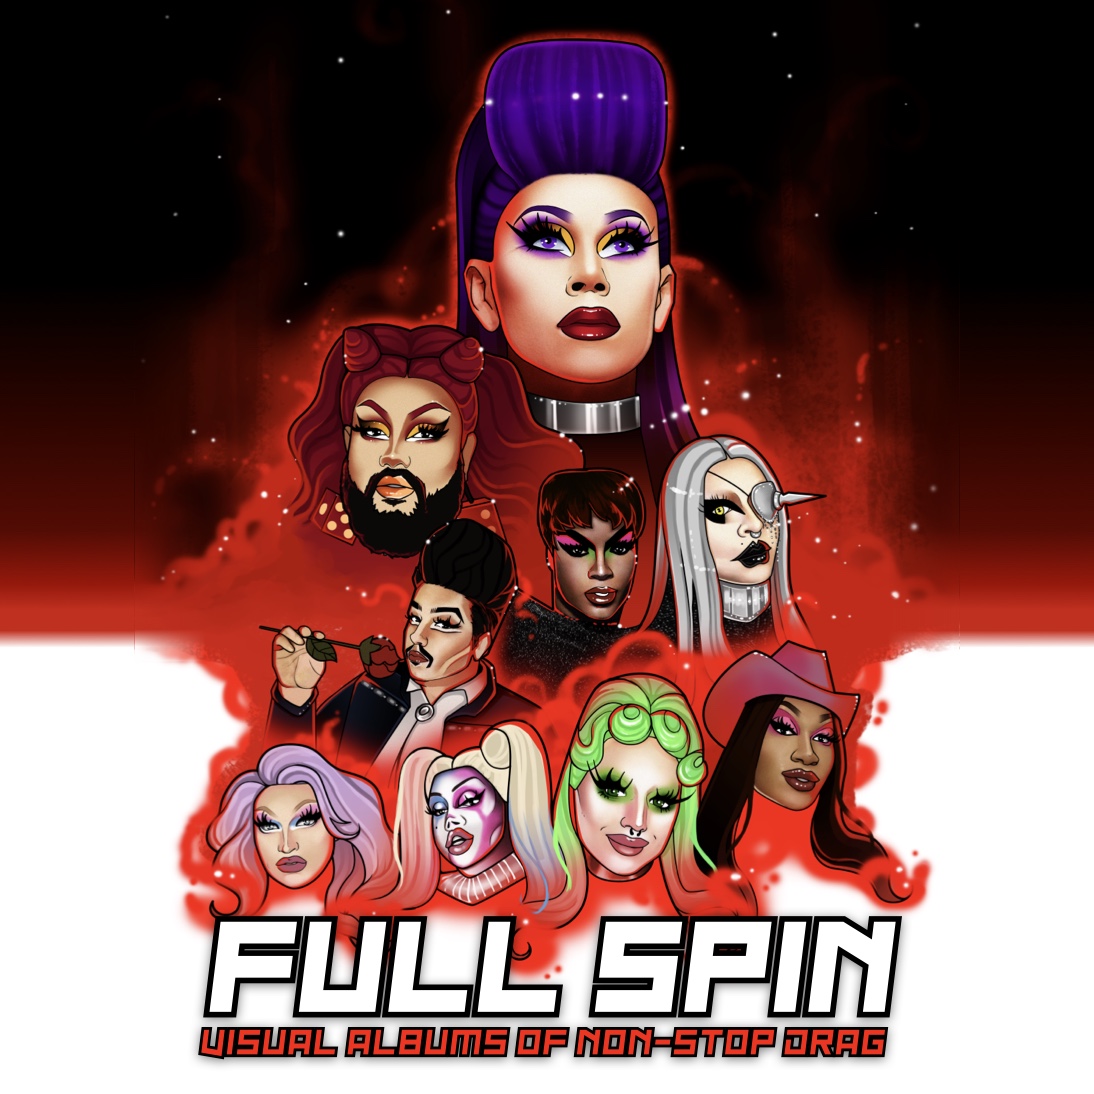 Full Spin: Visual Albums of Non-Stop Drag